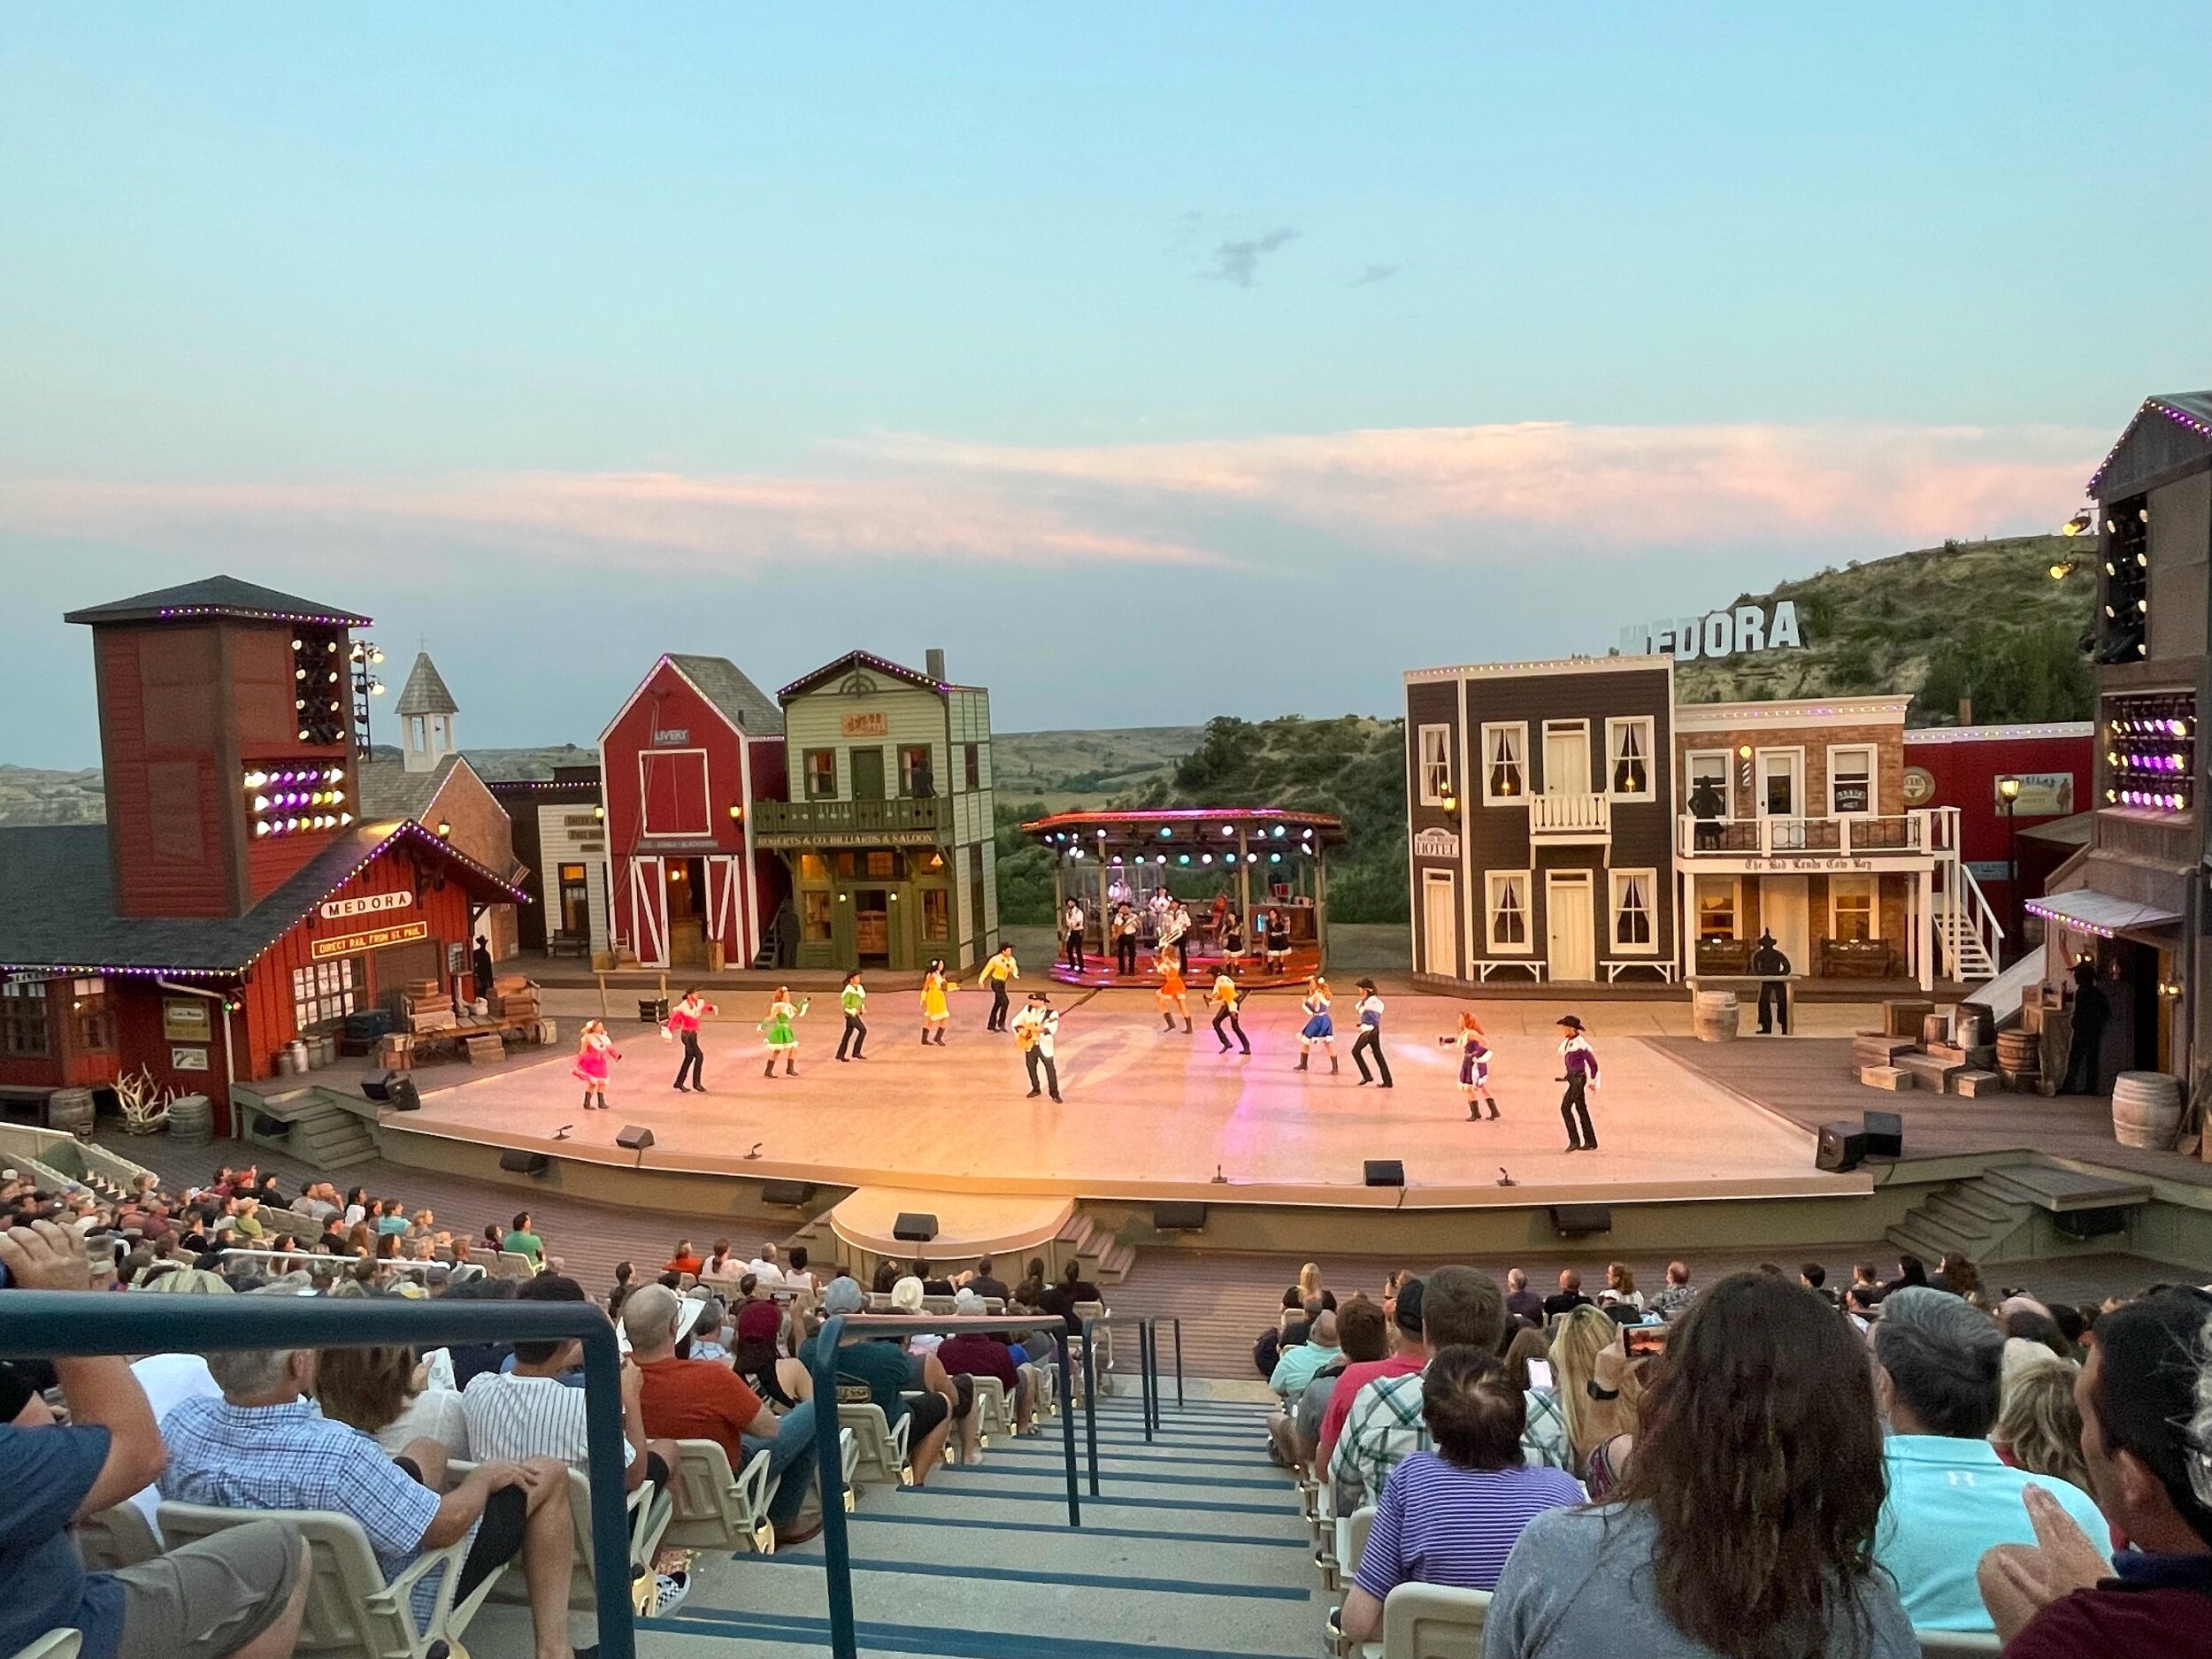  I would say going to the  Medora Musical  is one of the coolest things we've done this year. (Craig would likely pick something else 😂) While enjoying the  “rootin'-tootinest, boot-scootinest show in all the Midwest,”  we could see past the stage a